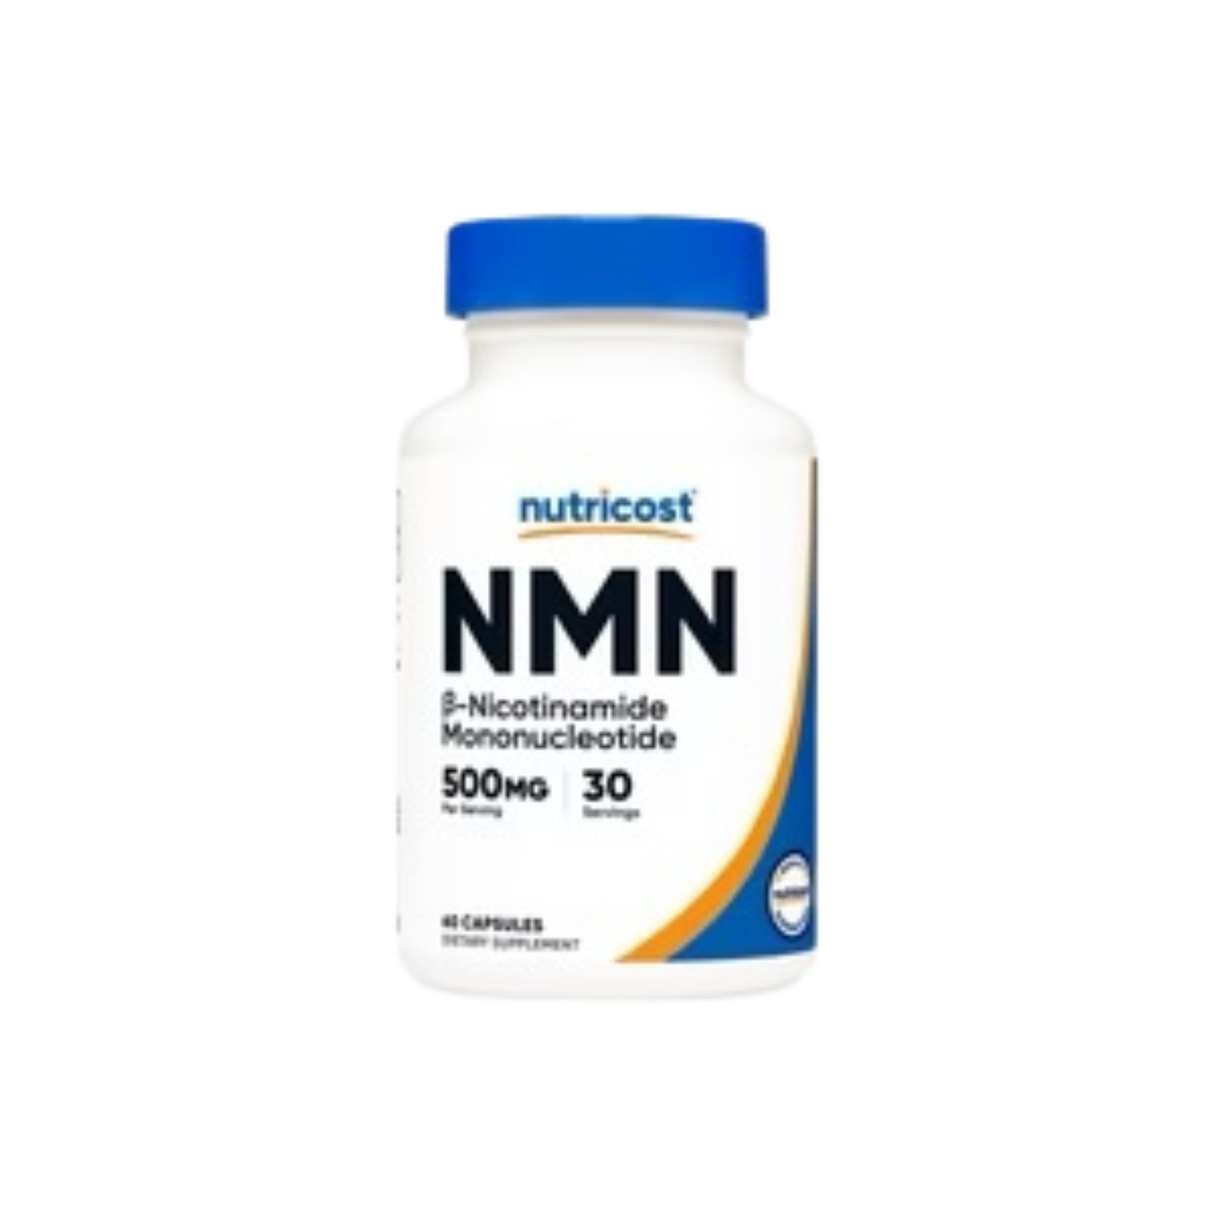 NMN Capsules (250 MG) - Kingpin Supplements 